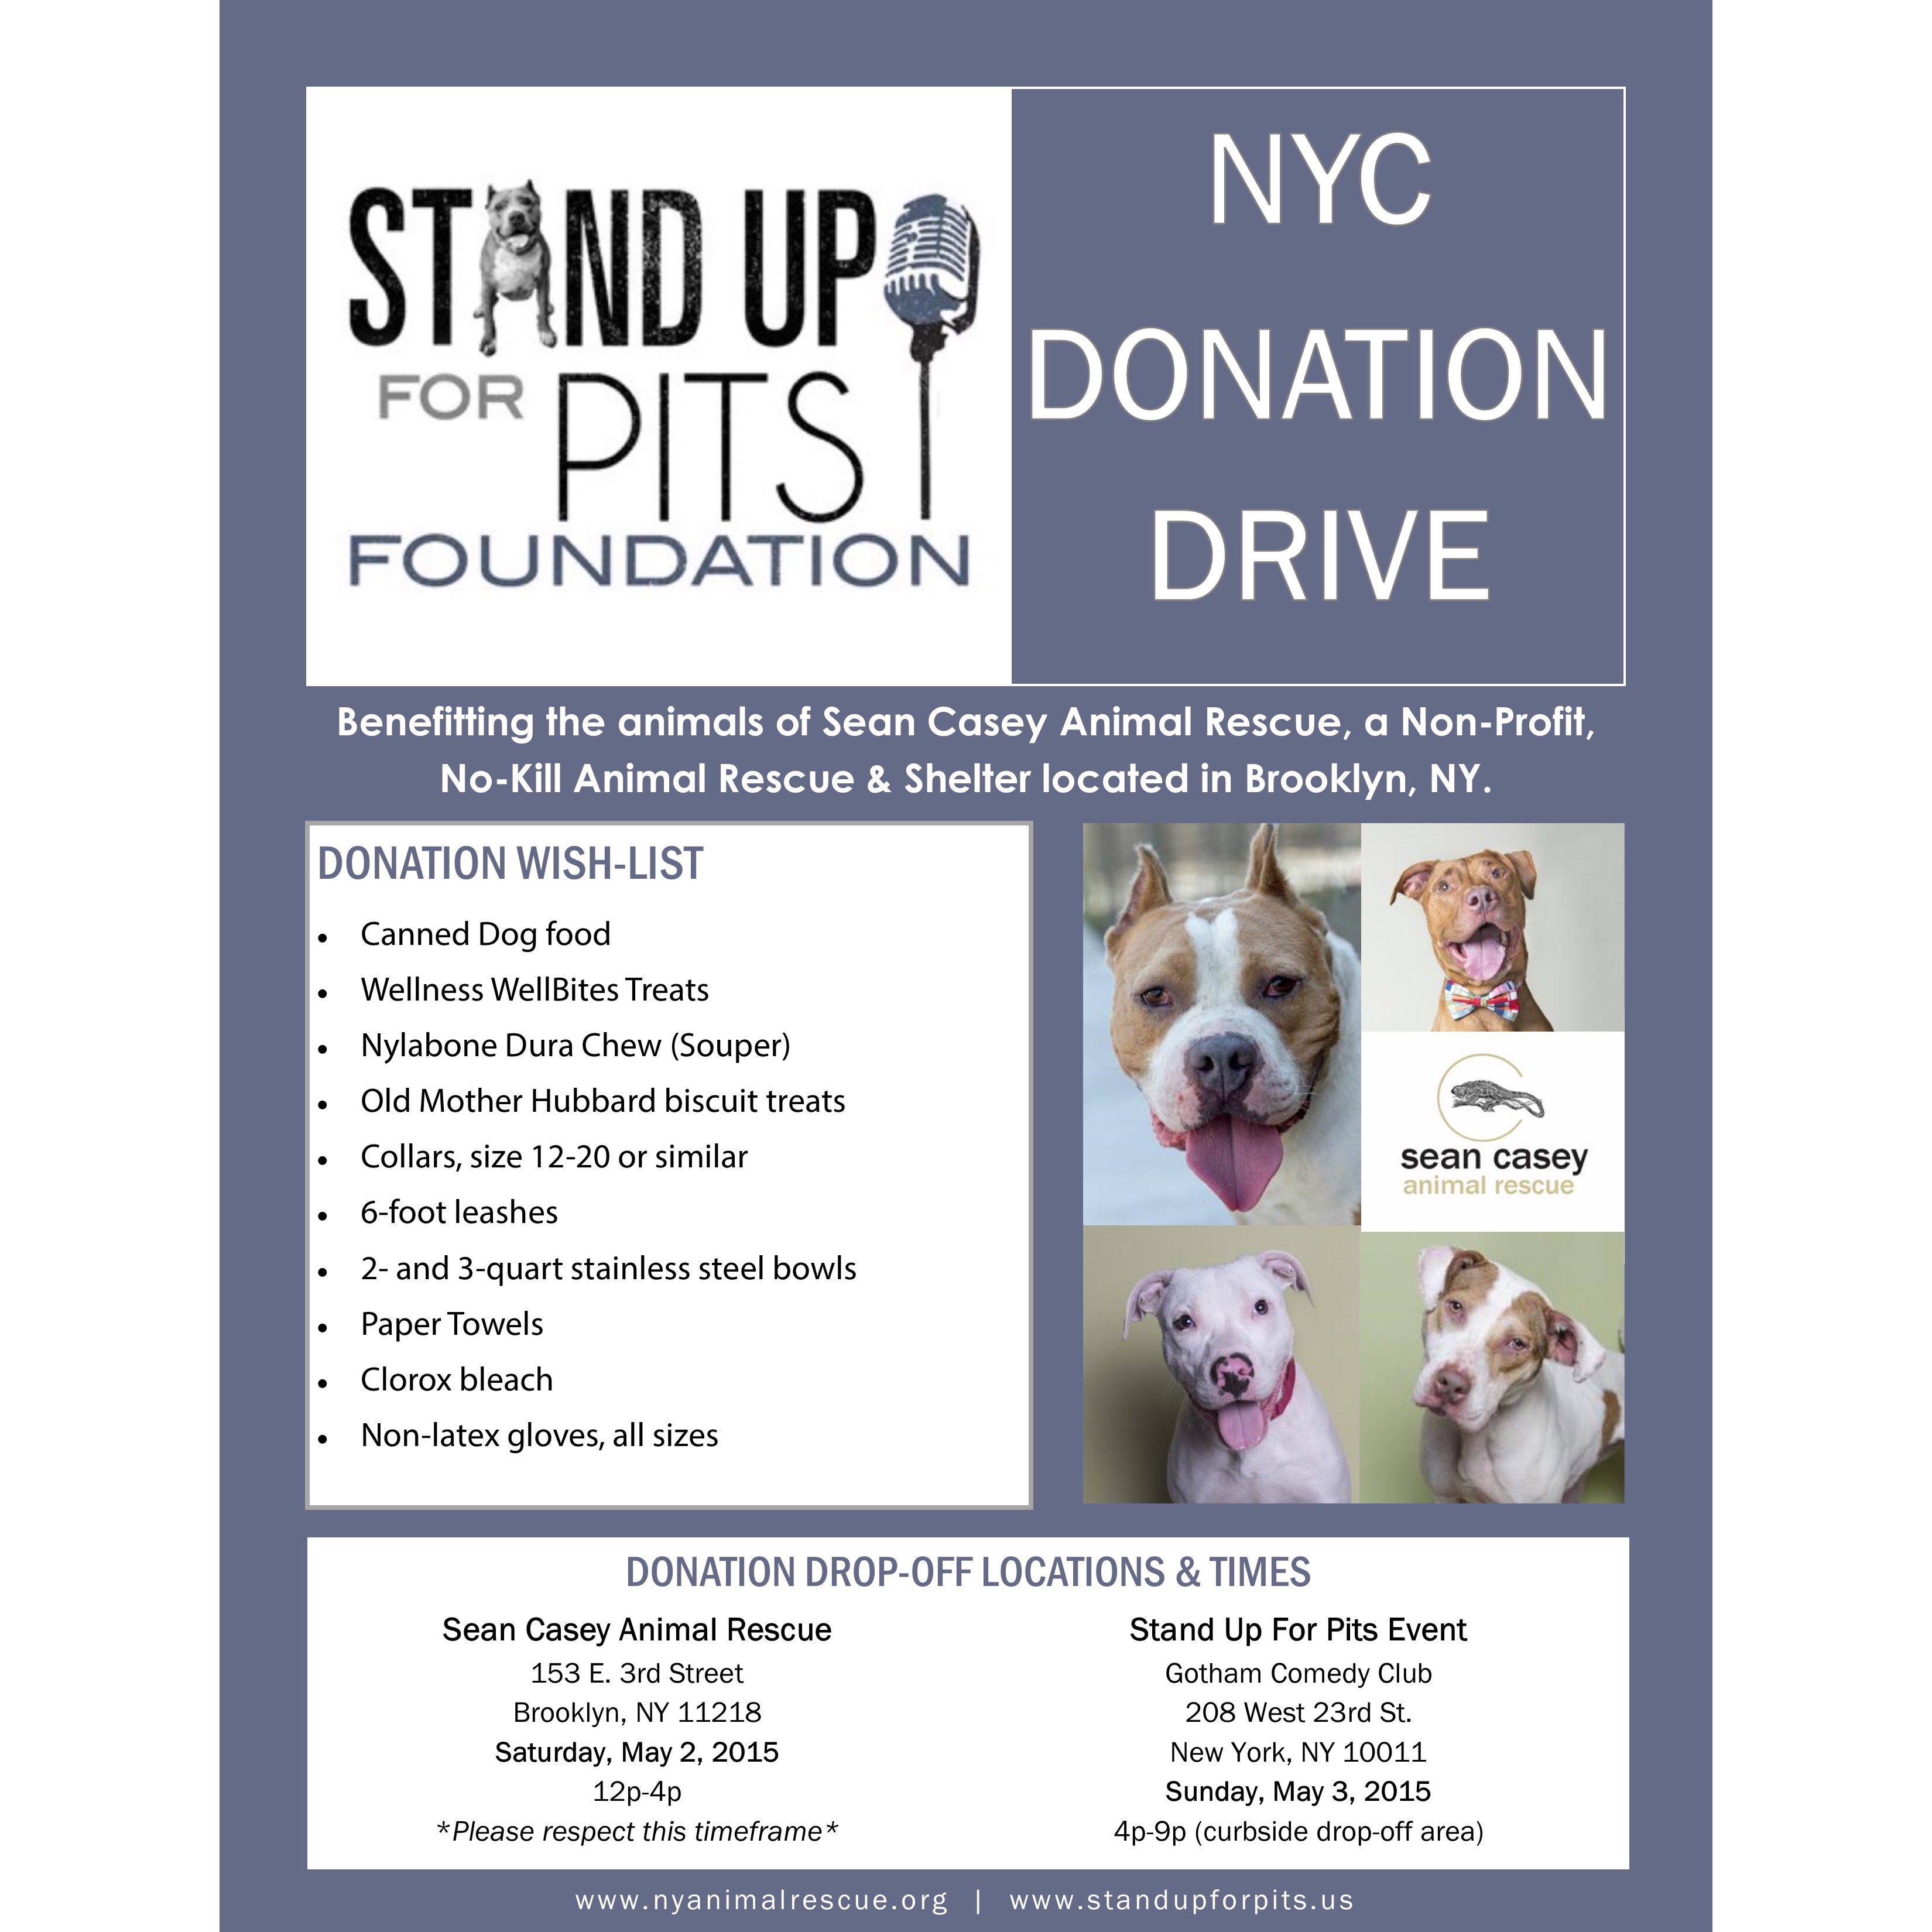 join the sufp foundation in helping nyc shelter animals!!